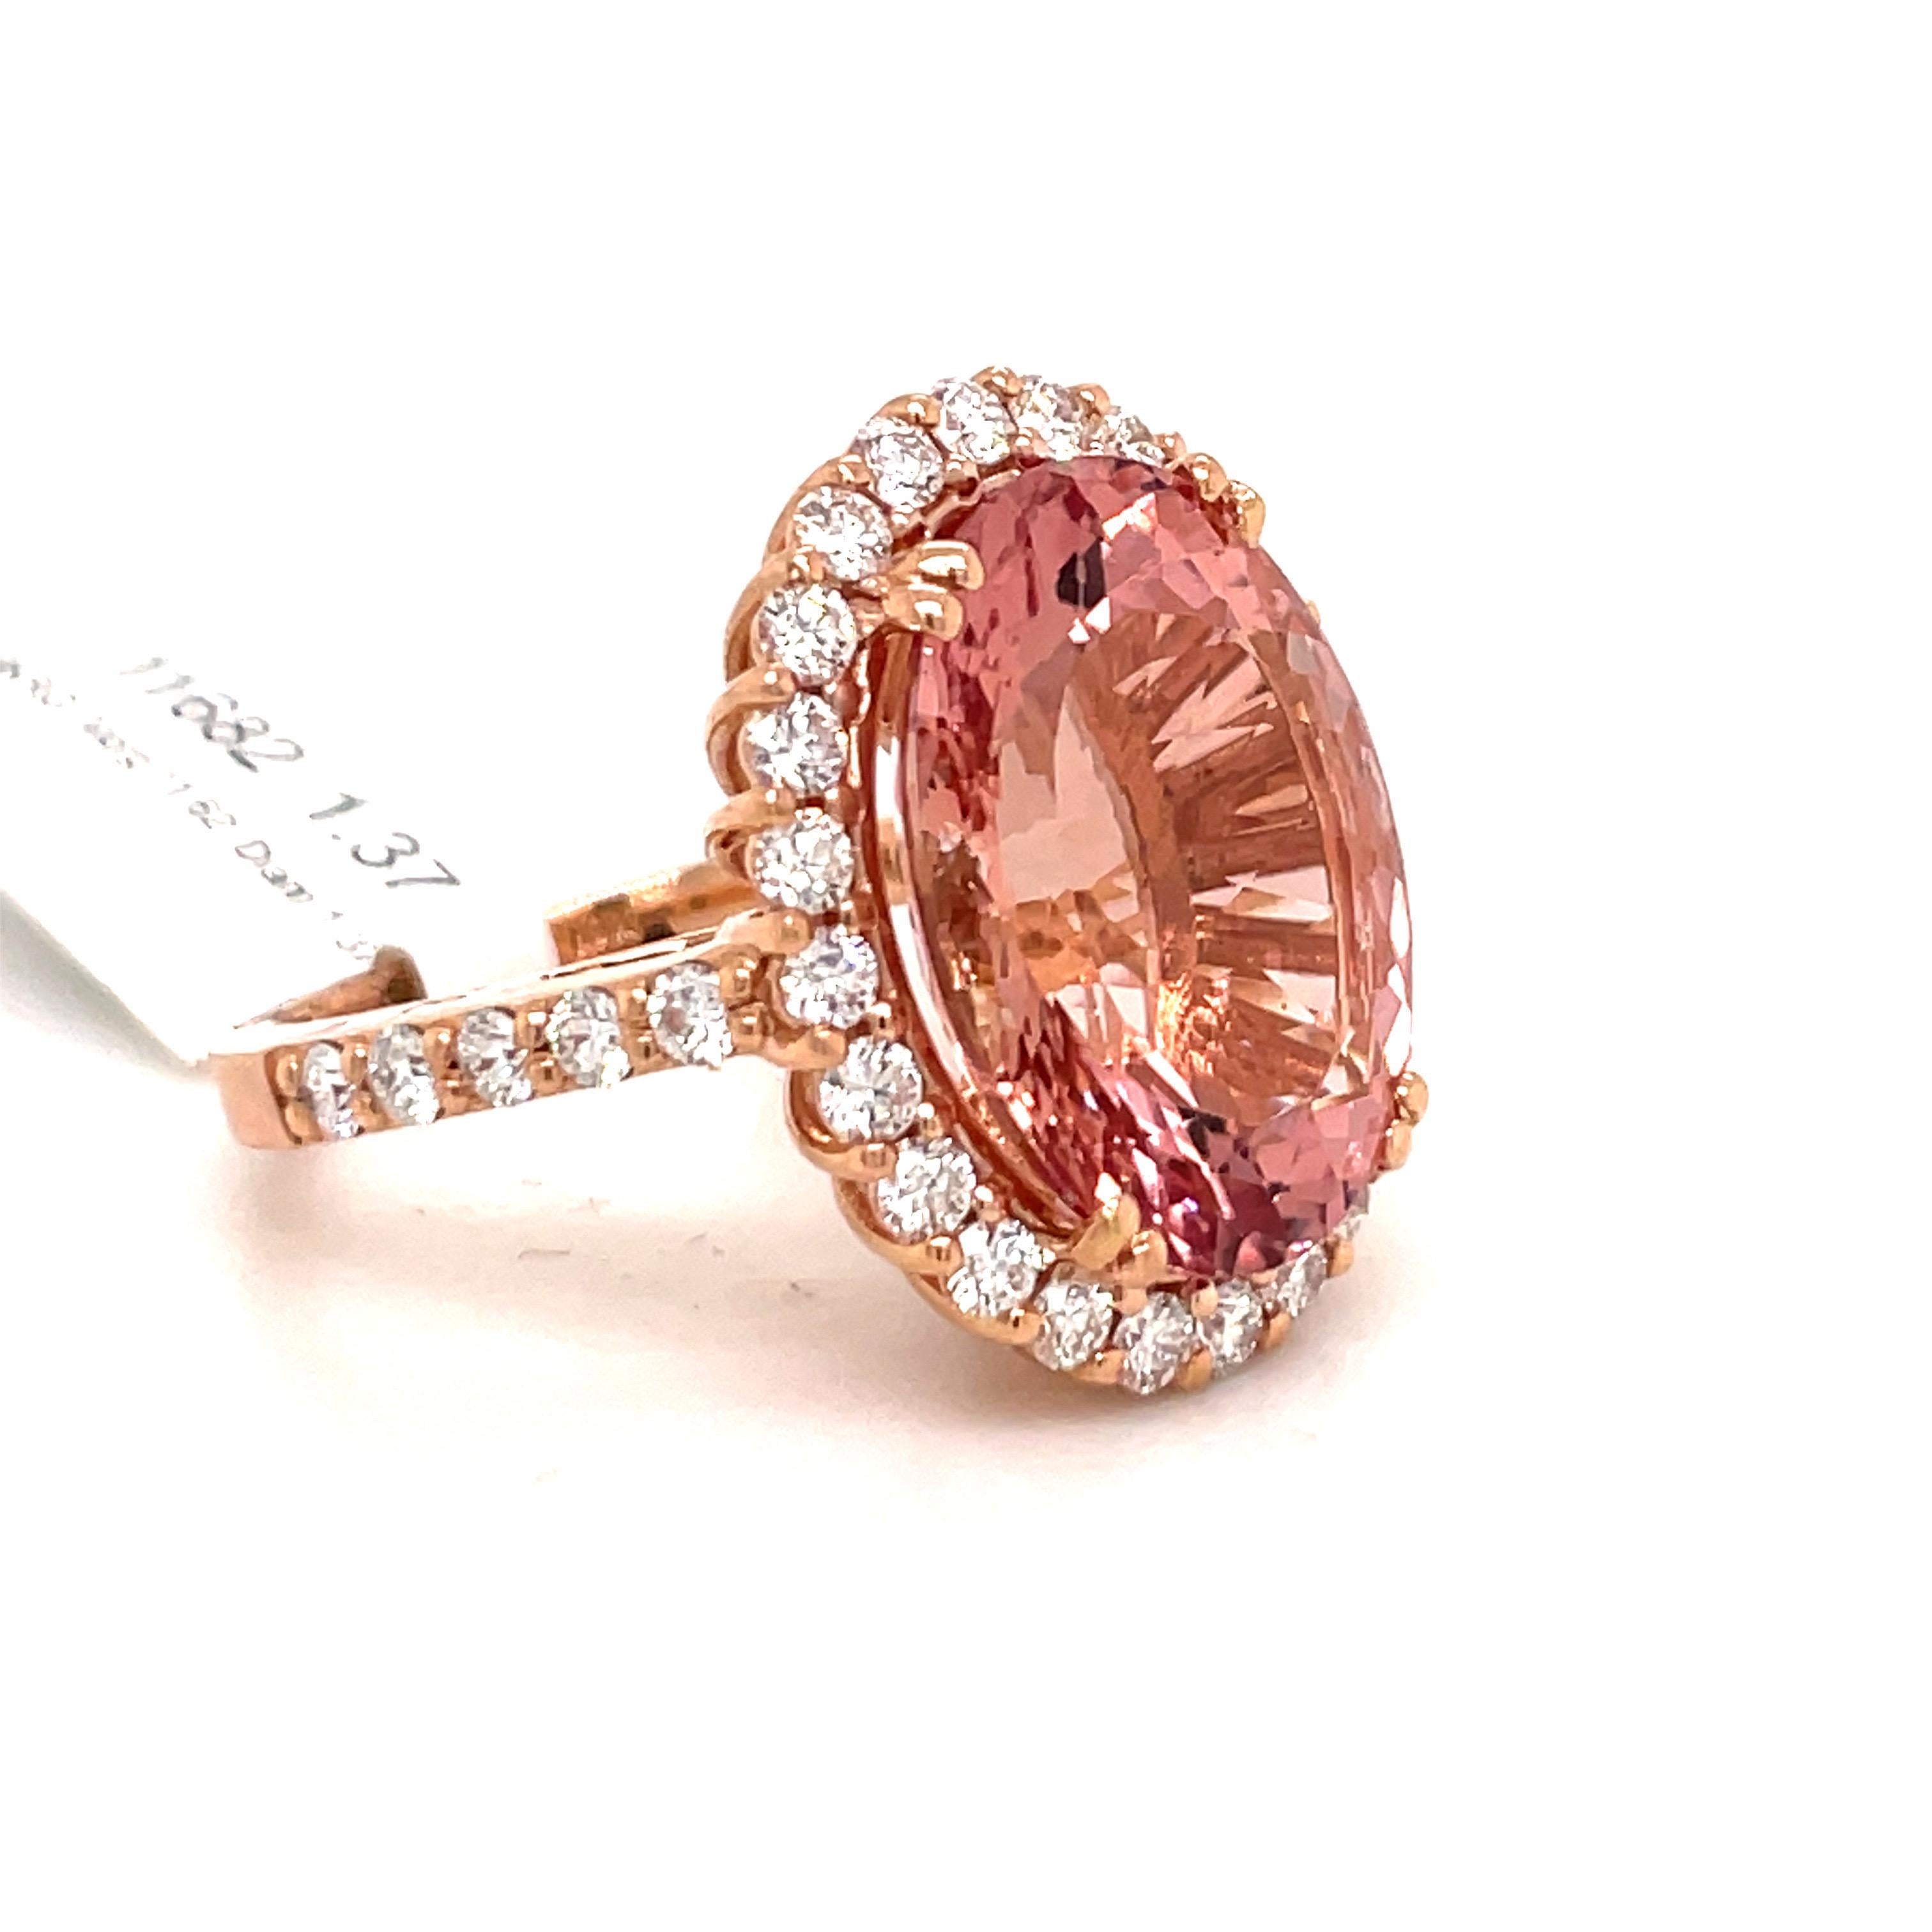 Round Cut Oval Cut Morganite Diamond Halo Cocktail Ring 12.99 Carats 18 Karat Rose Gold For Sale